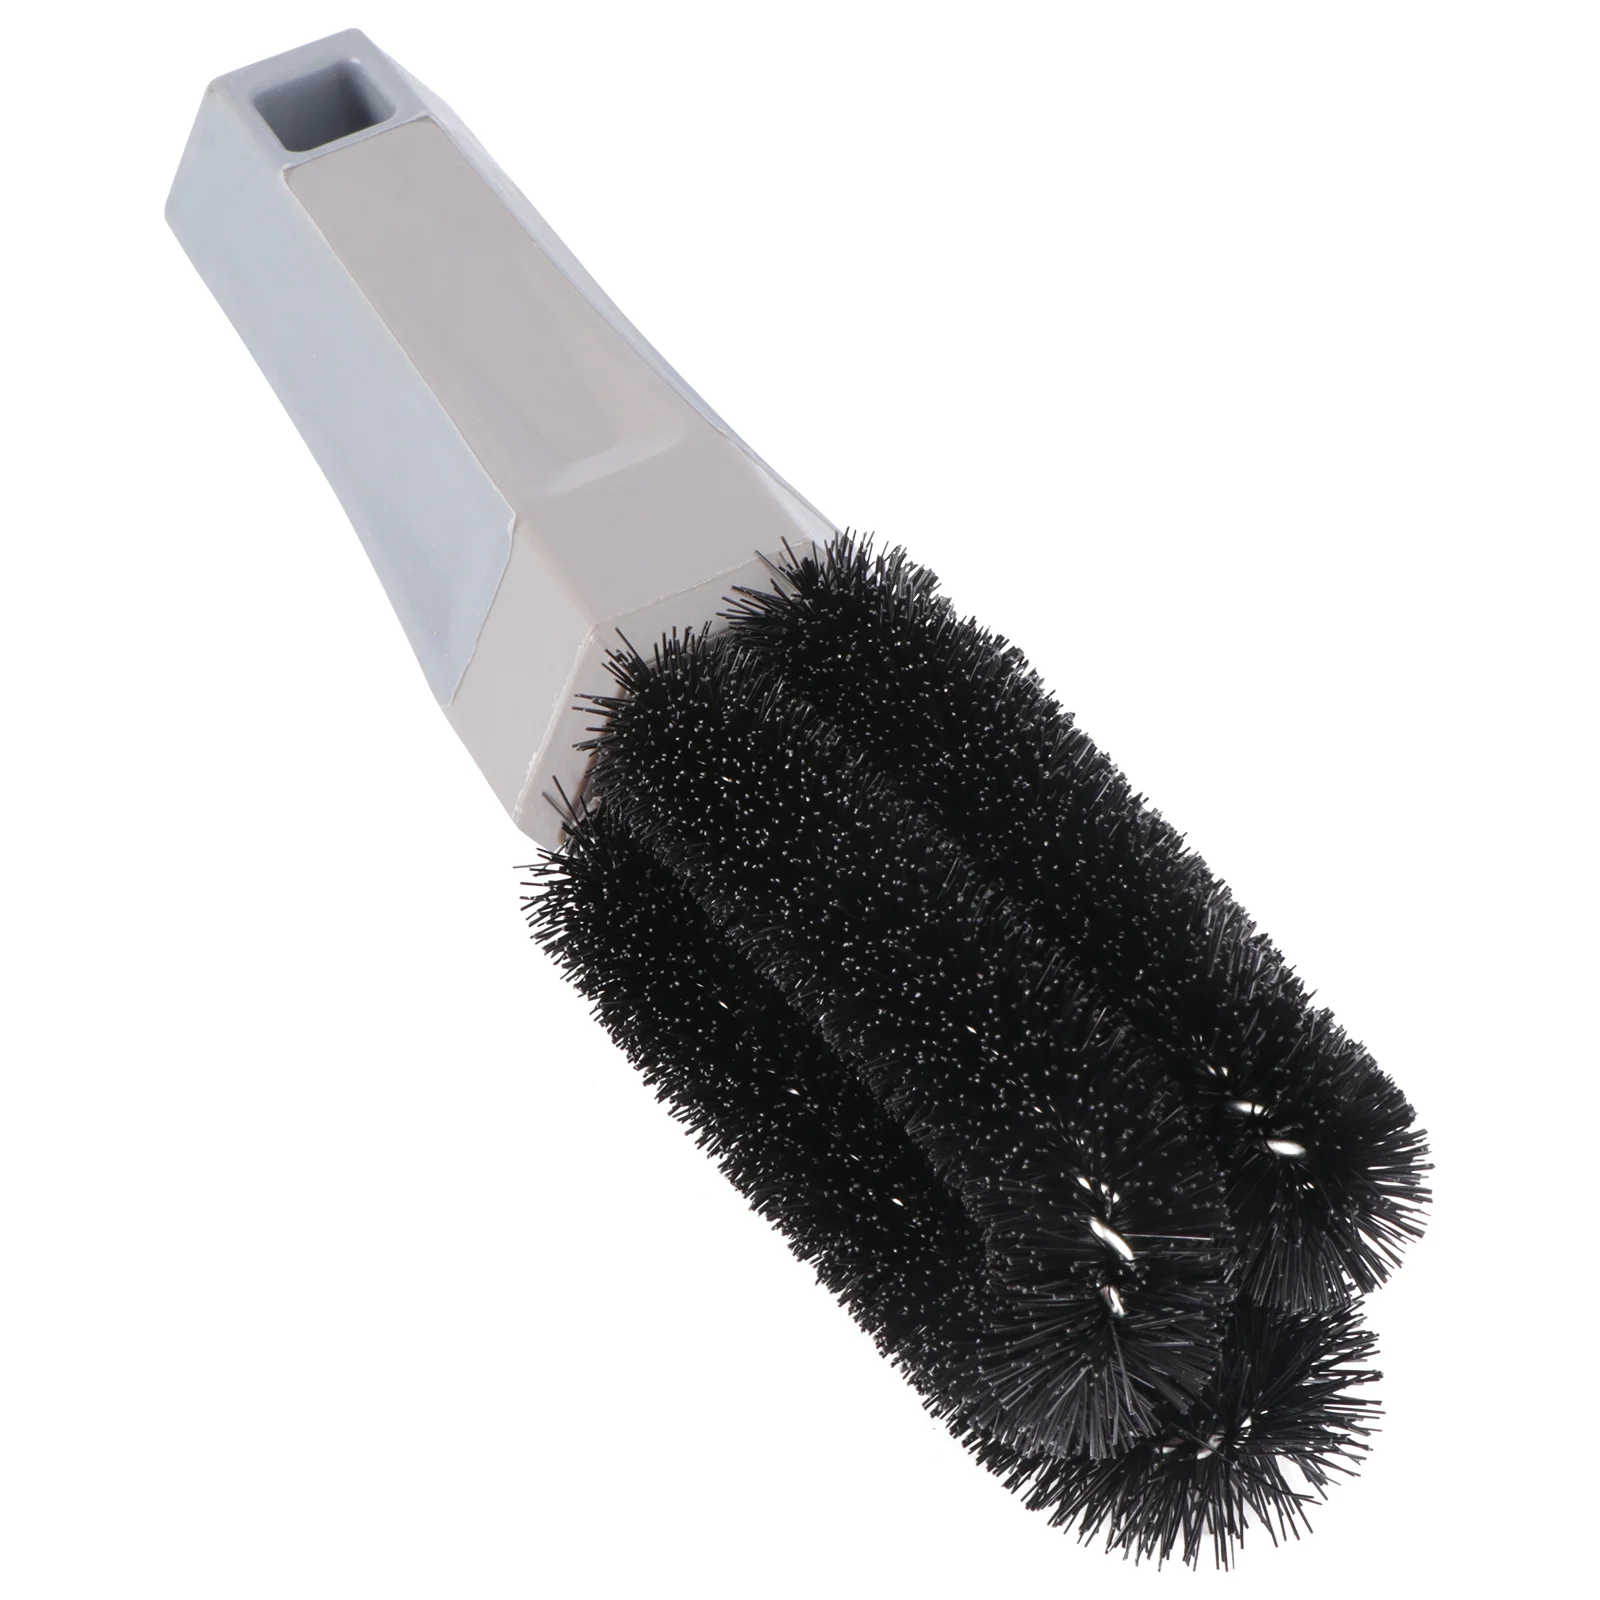 Lug Nut Brush Wheel Tire Cleaning Brush Car Automotive Detail Cleaning Tool